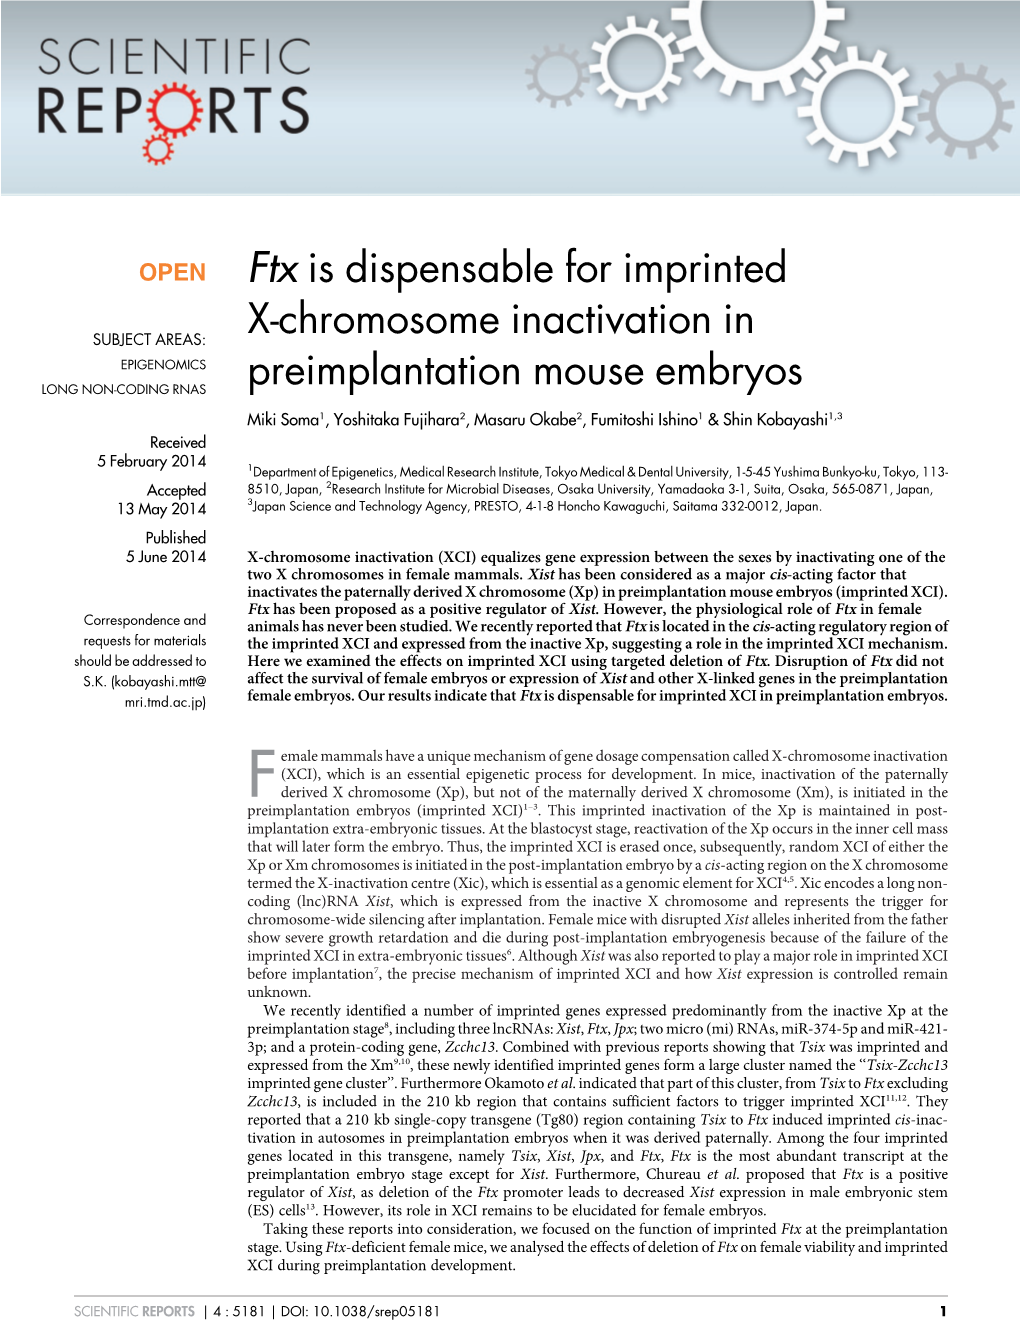 Ftx Is Dispensable for Imprinted X-Chromosome Inactivation In